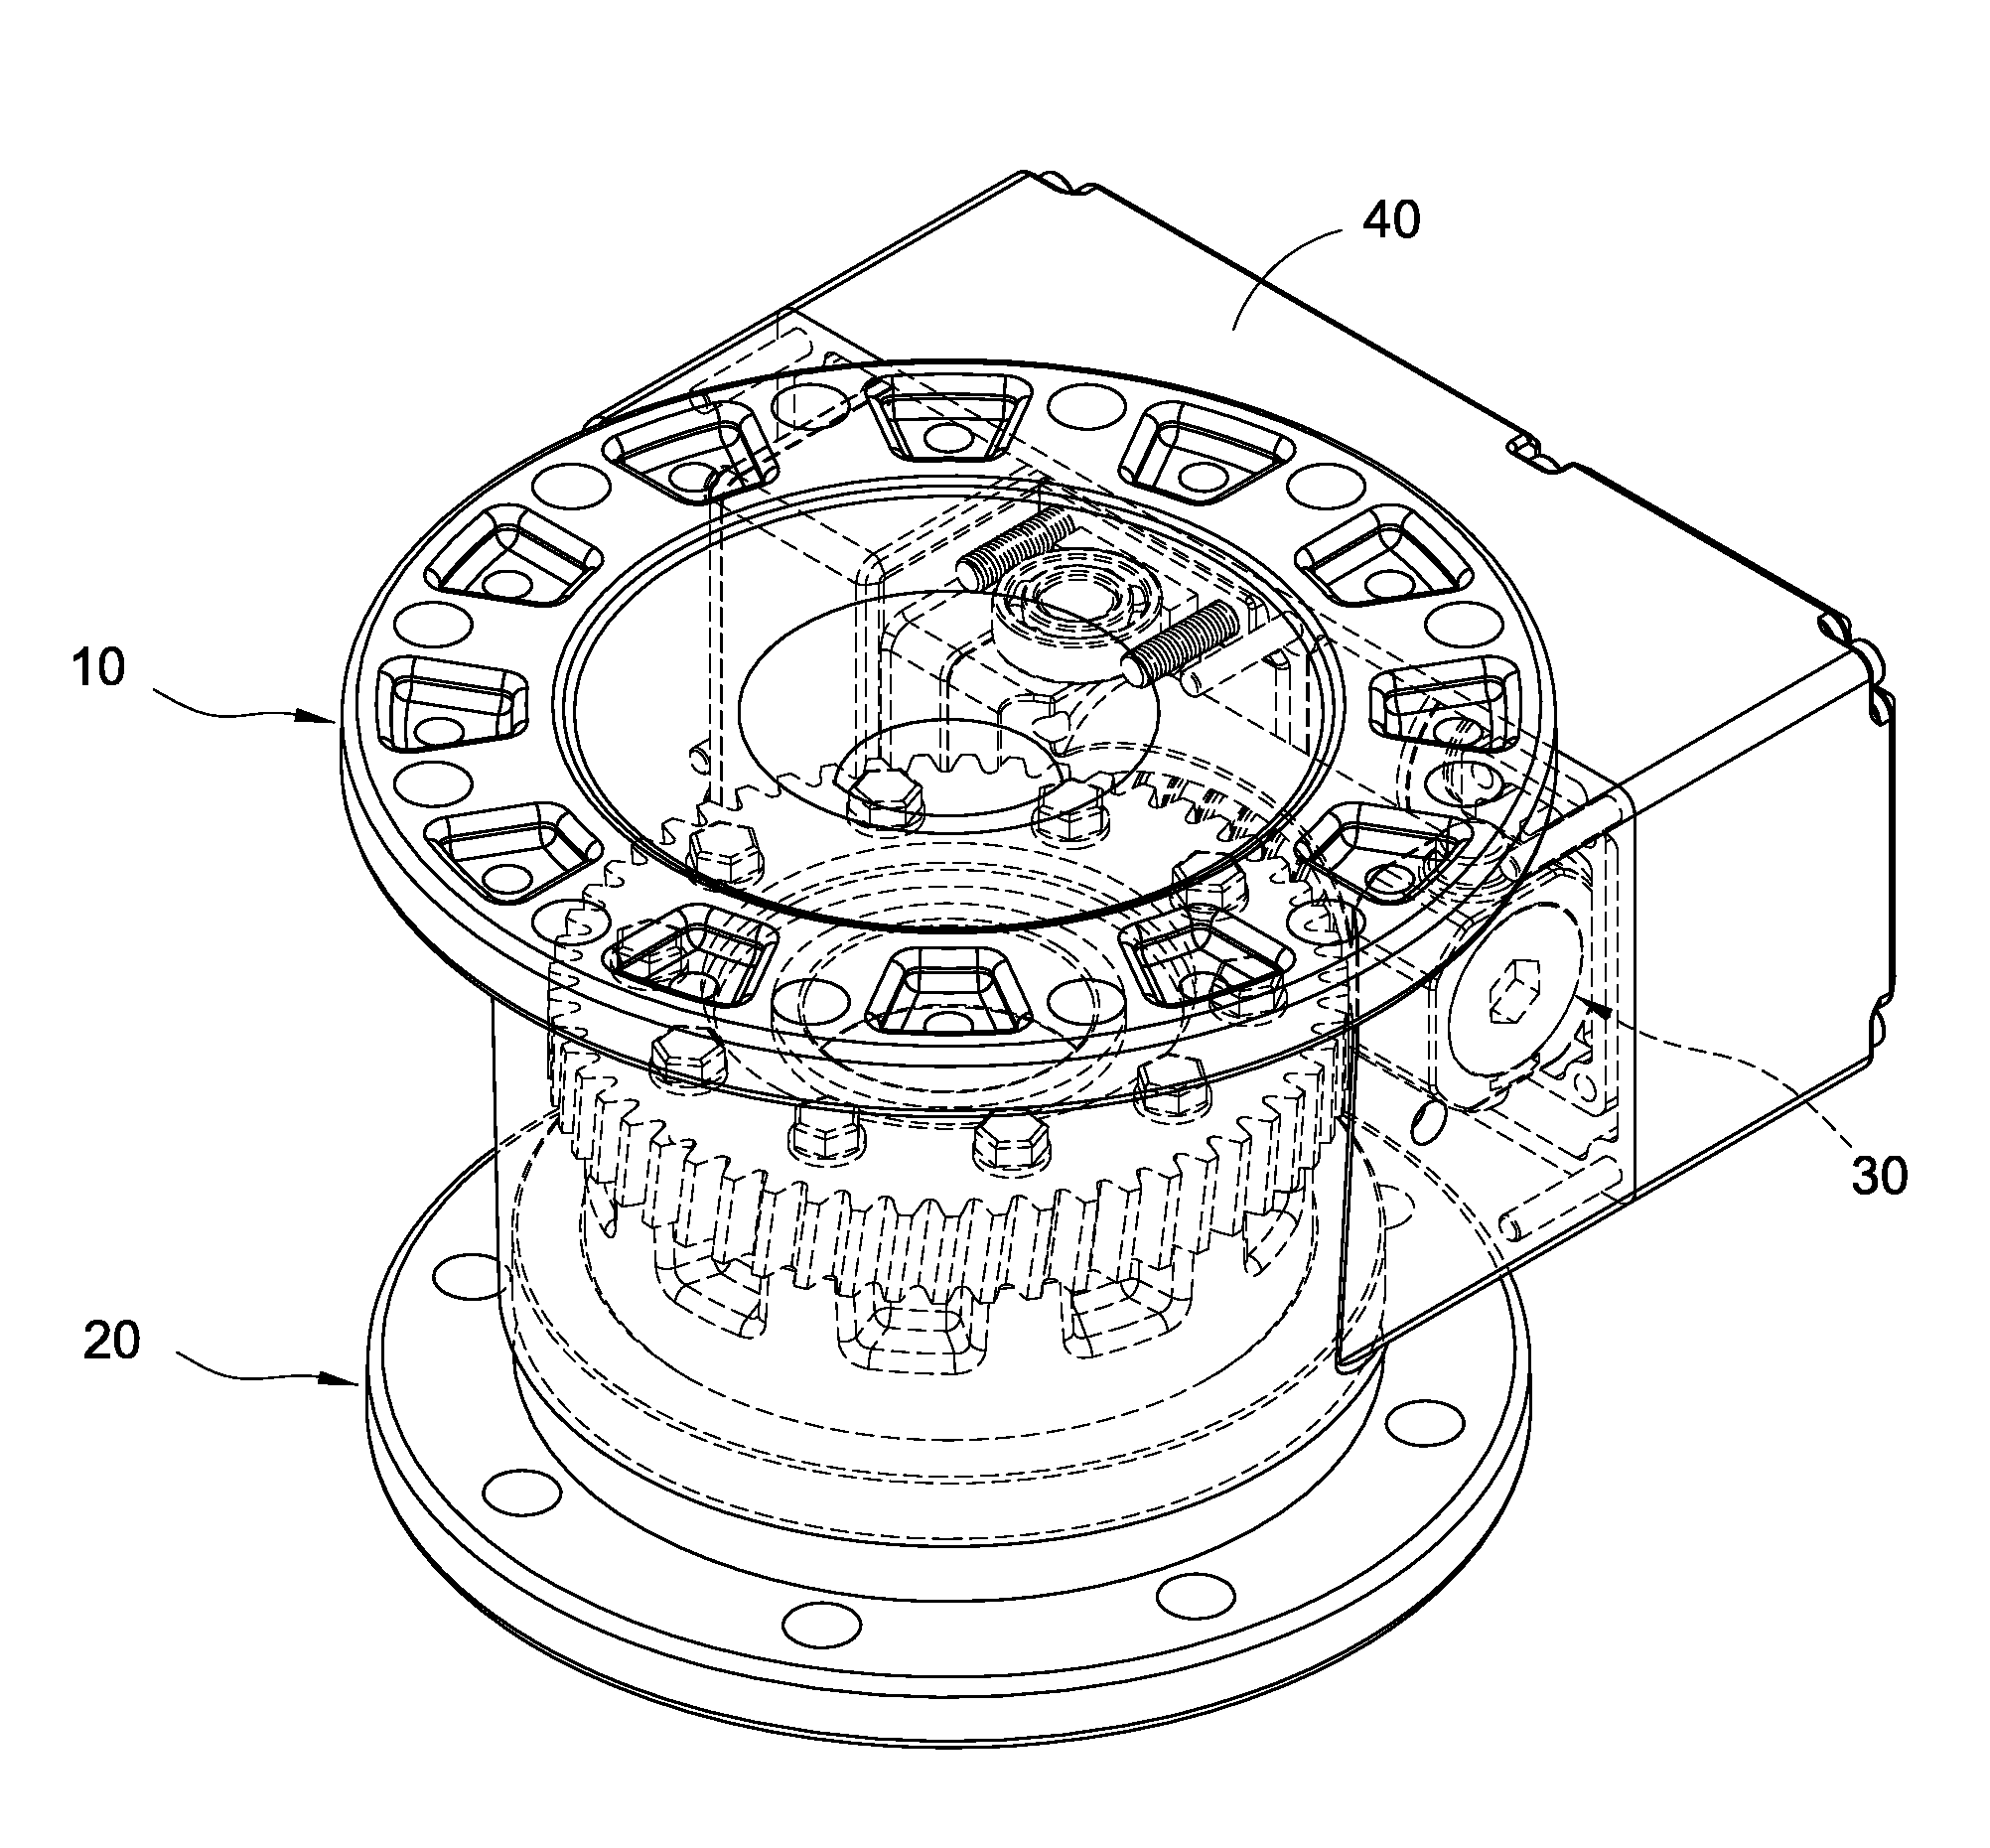 Steering device for use in solar tracking equipment